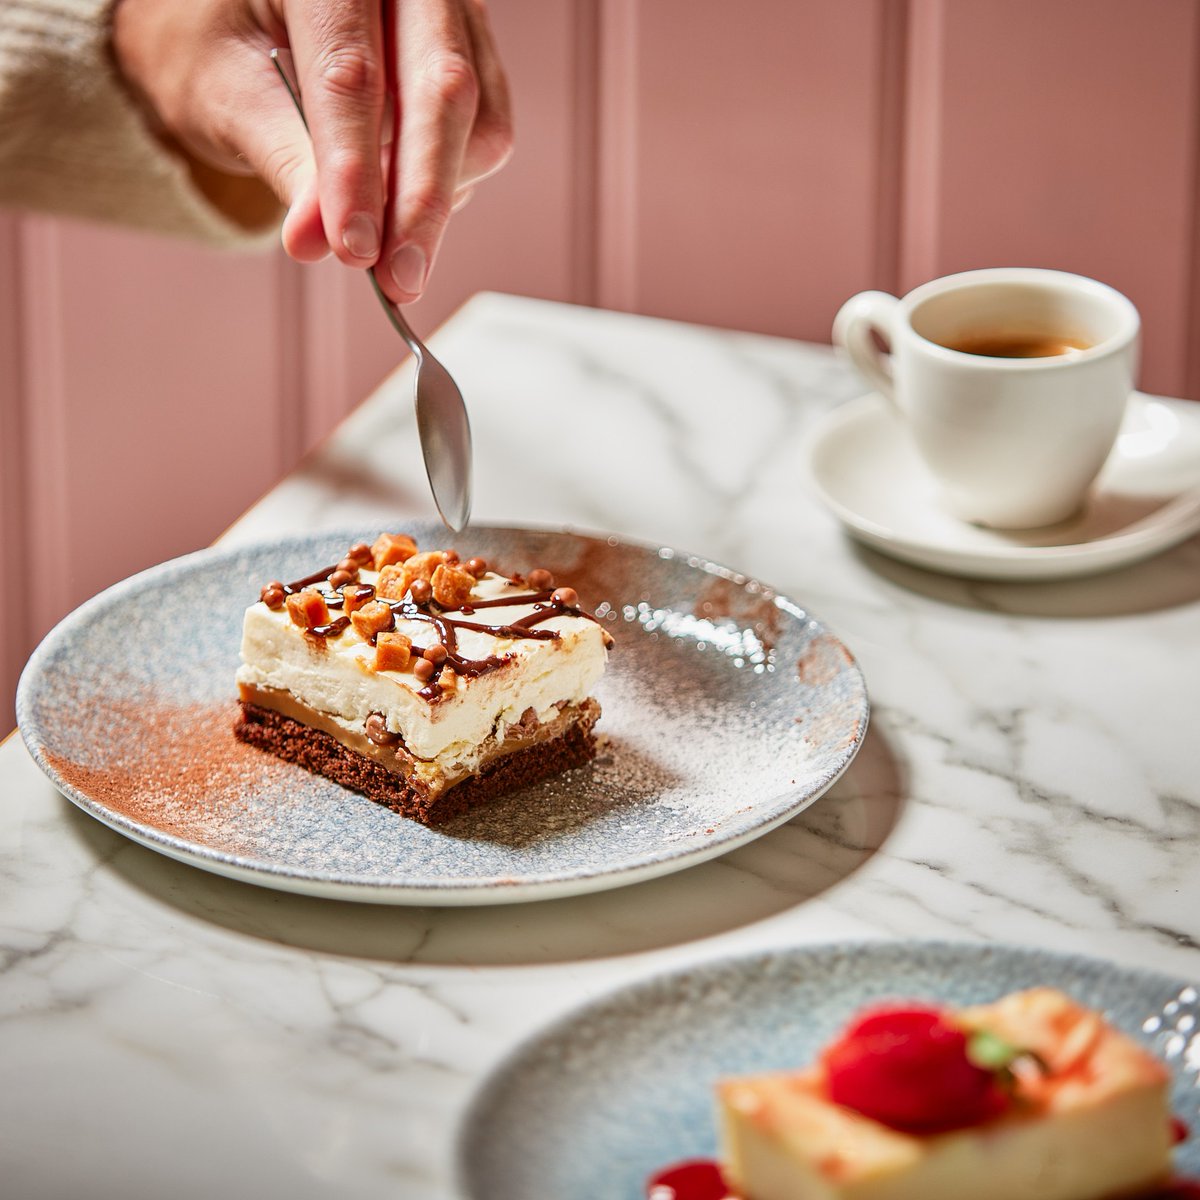 There’s always room for dessert when it's as good as our Millionaire Toffee Crunch 😍 Indulge this Valentine's with the ultimate sweet treats! Book Now: bellaitalia.co.uk